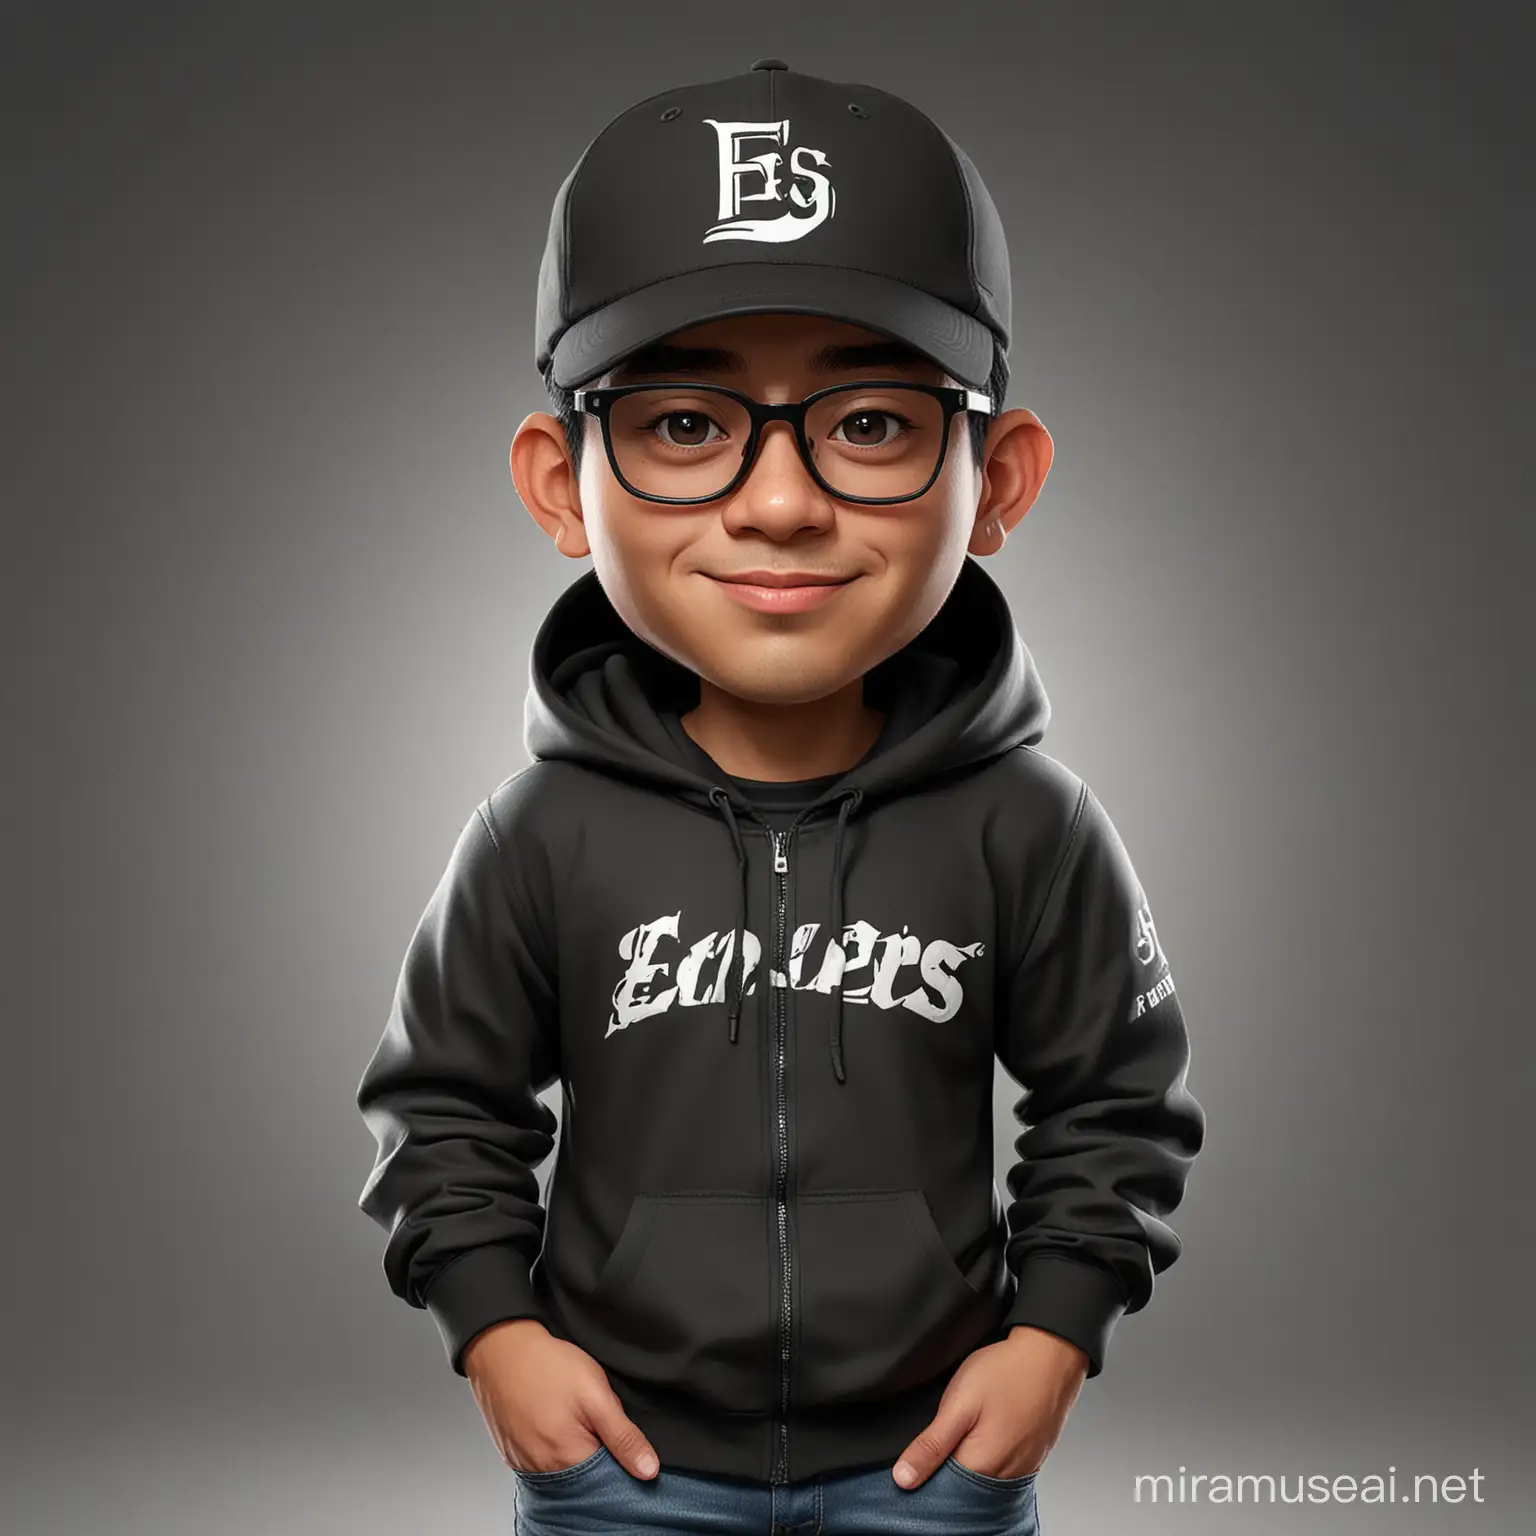 Caricature potrait body potrait, An Indonesian man age 25 years old, big head, wearing black baseball cap text "es" and glasses, neat short hair, wearing black hoodie, realistic, unreal engine, 